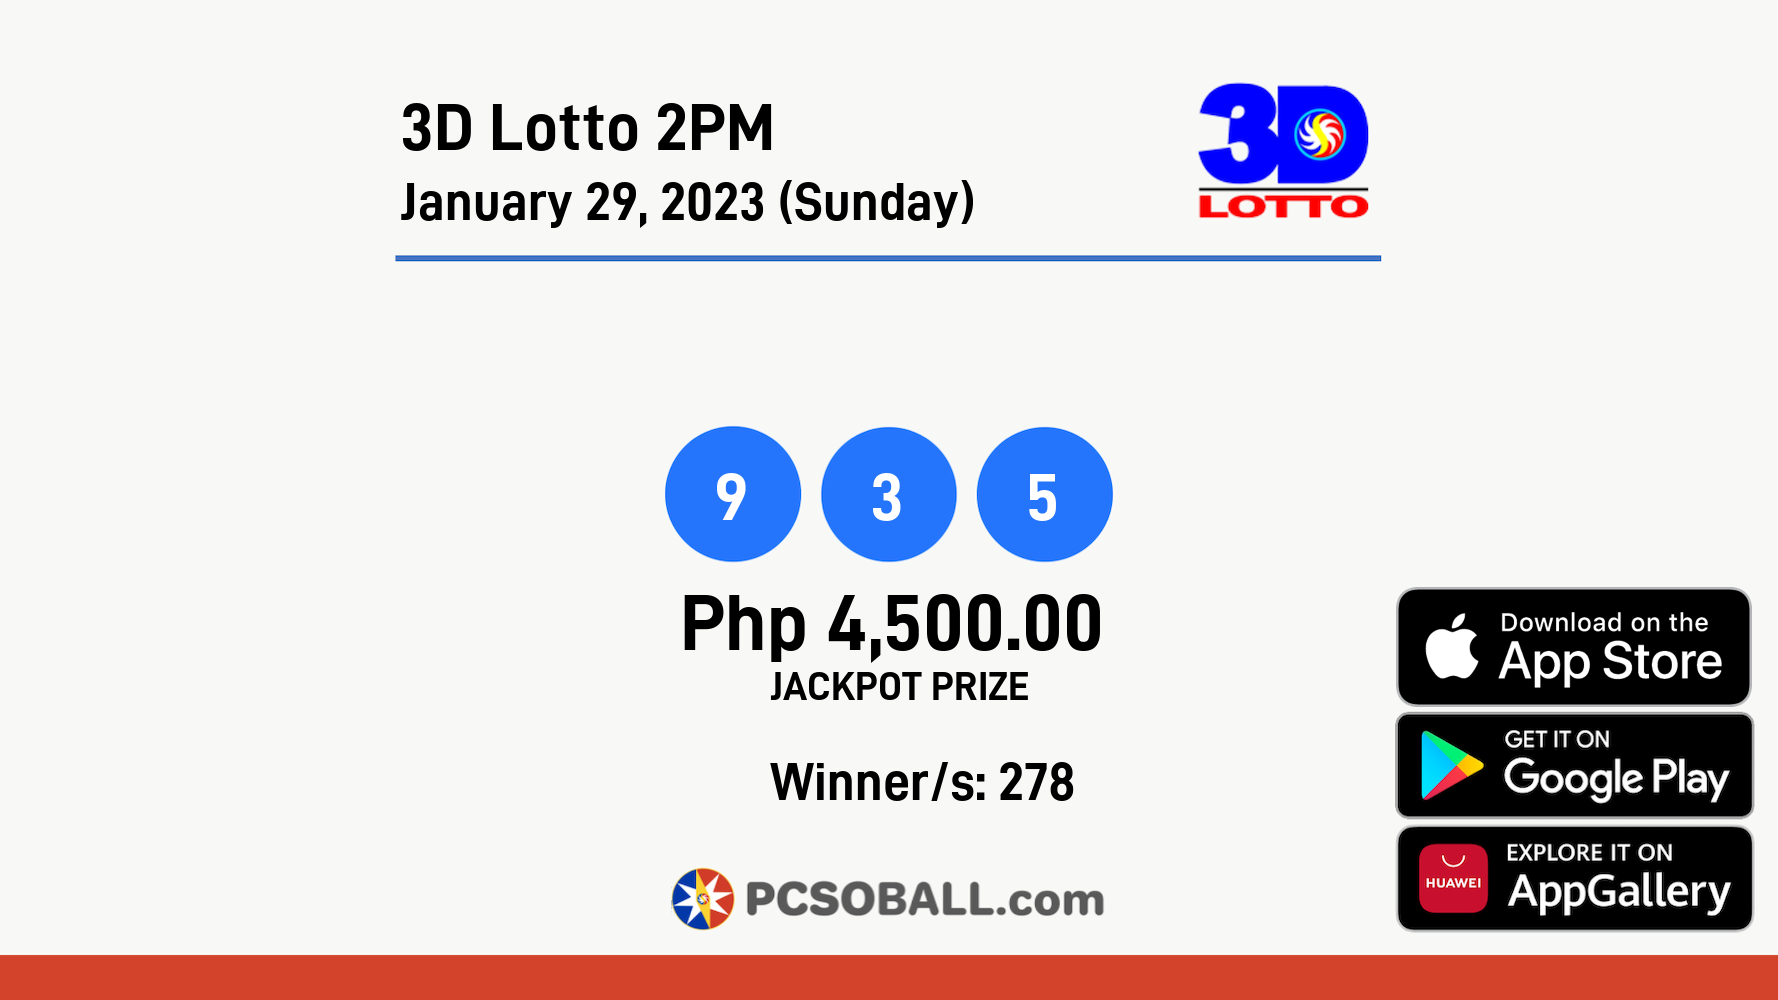 3D Lotto 2PM January 29, 2023 (Sunday) Result